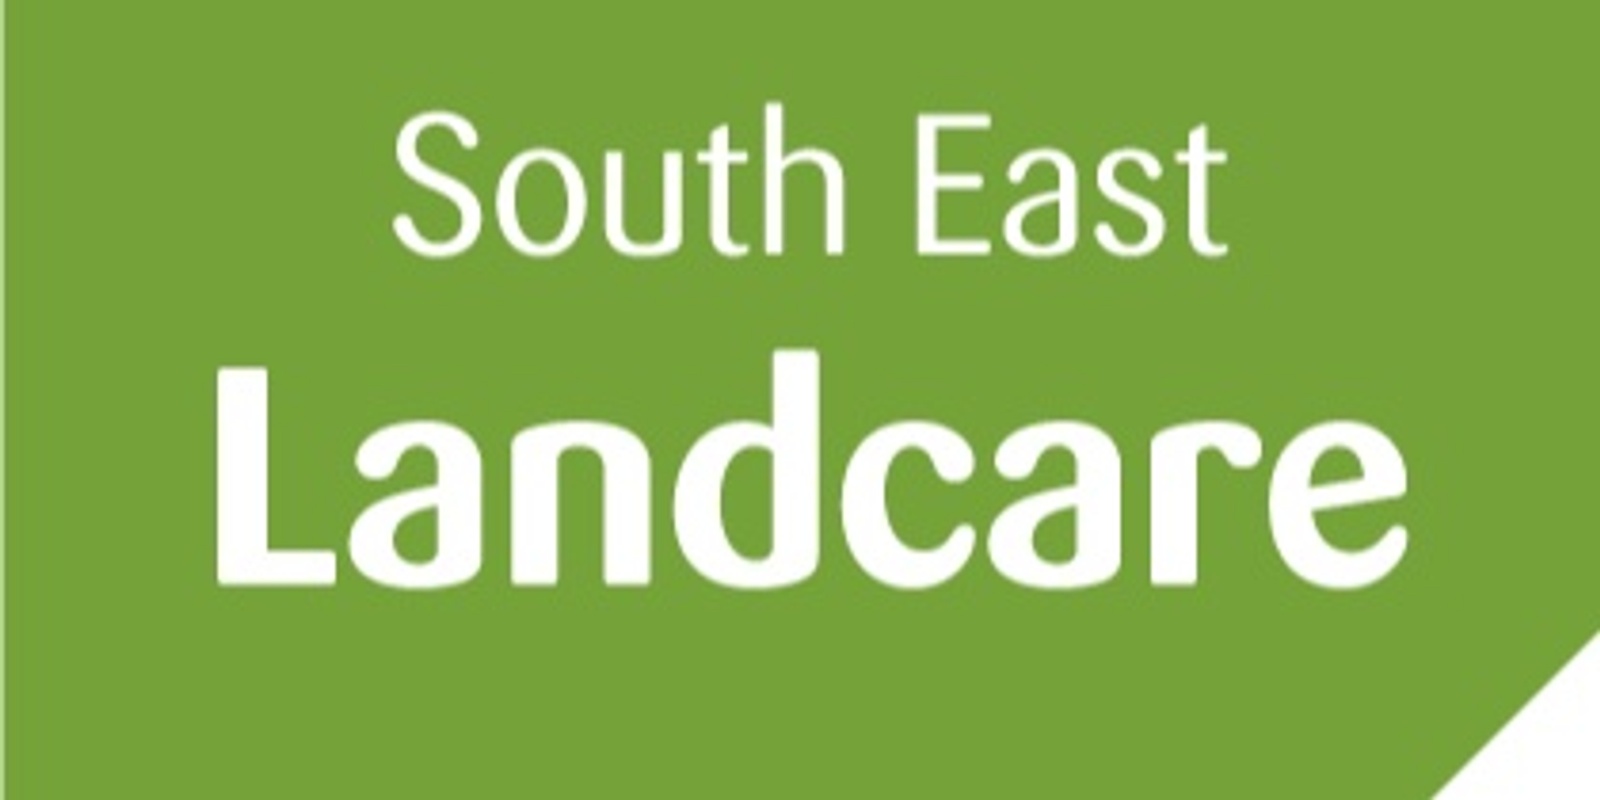 South East Landcare's banner